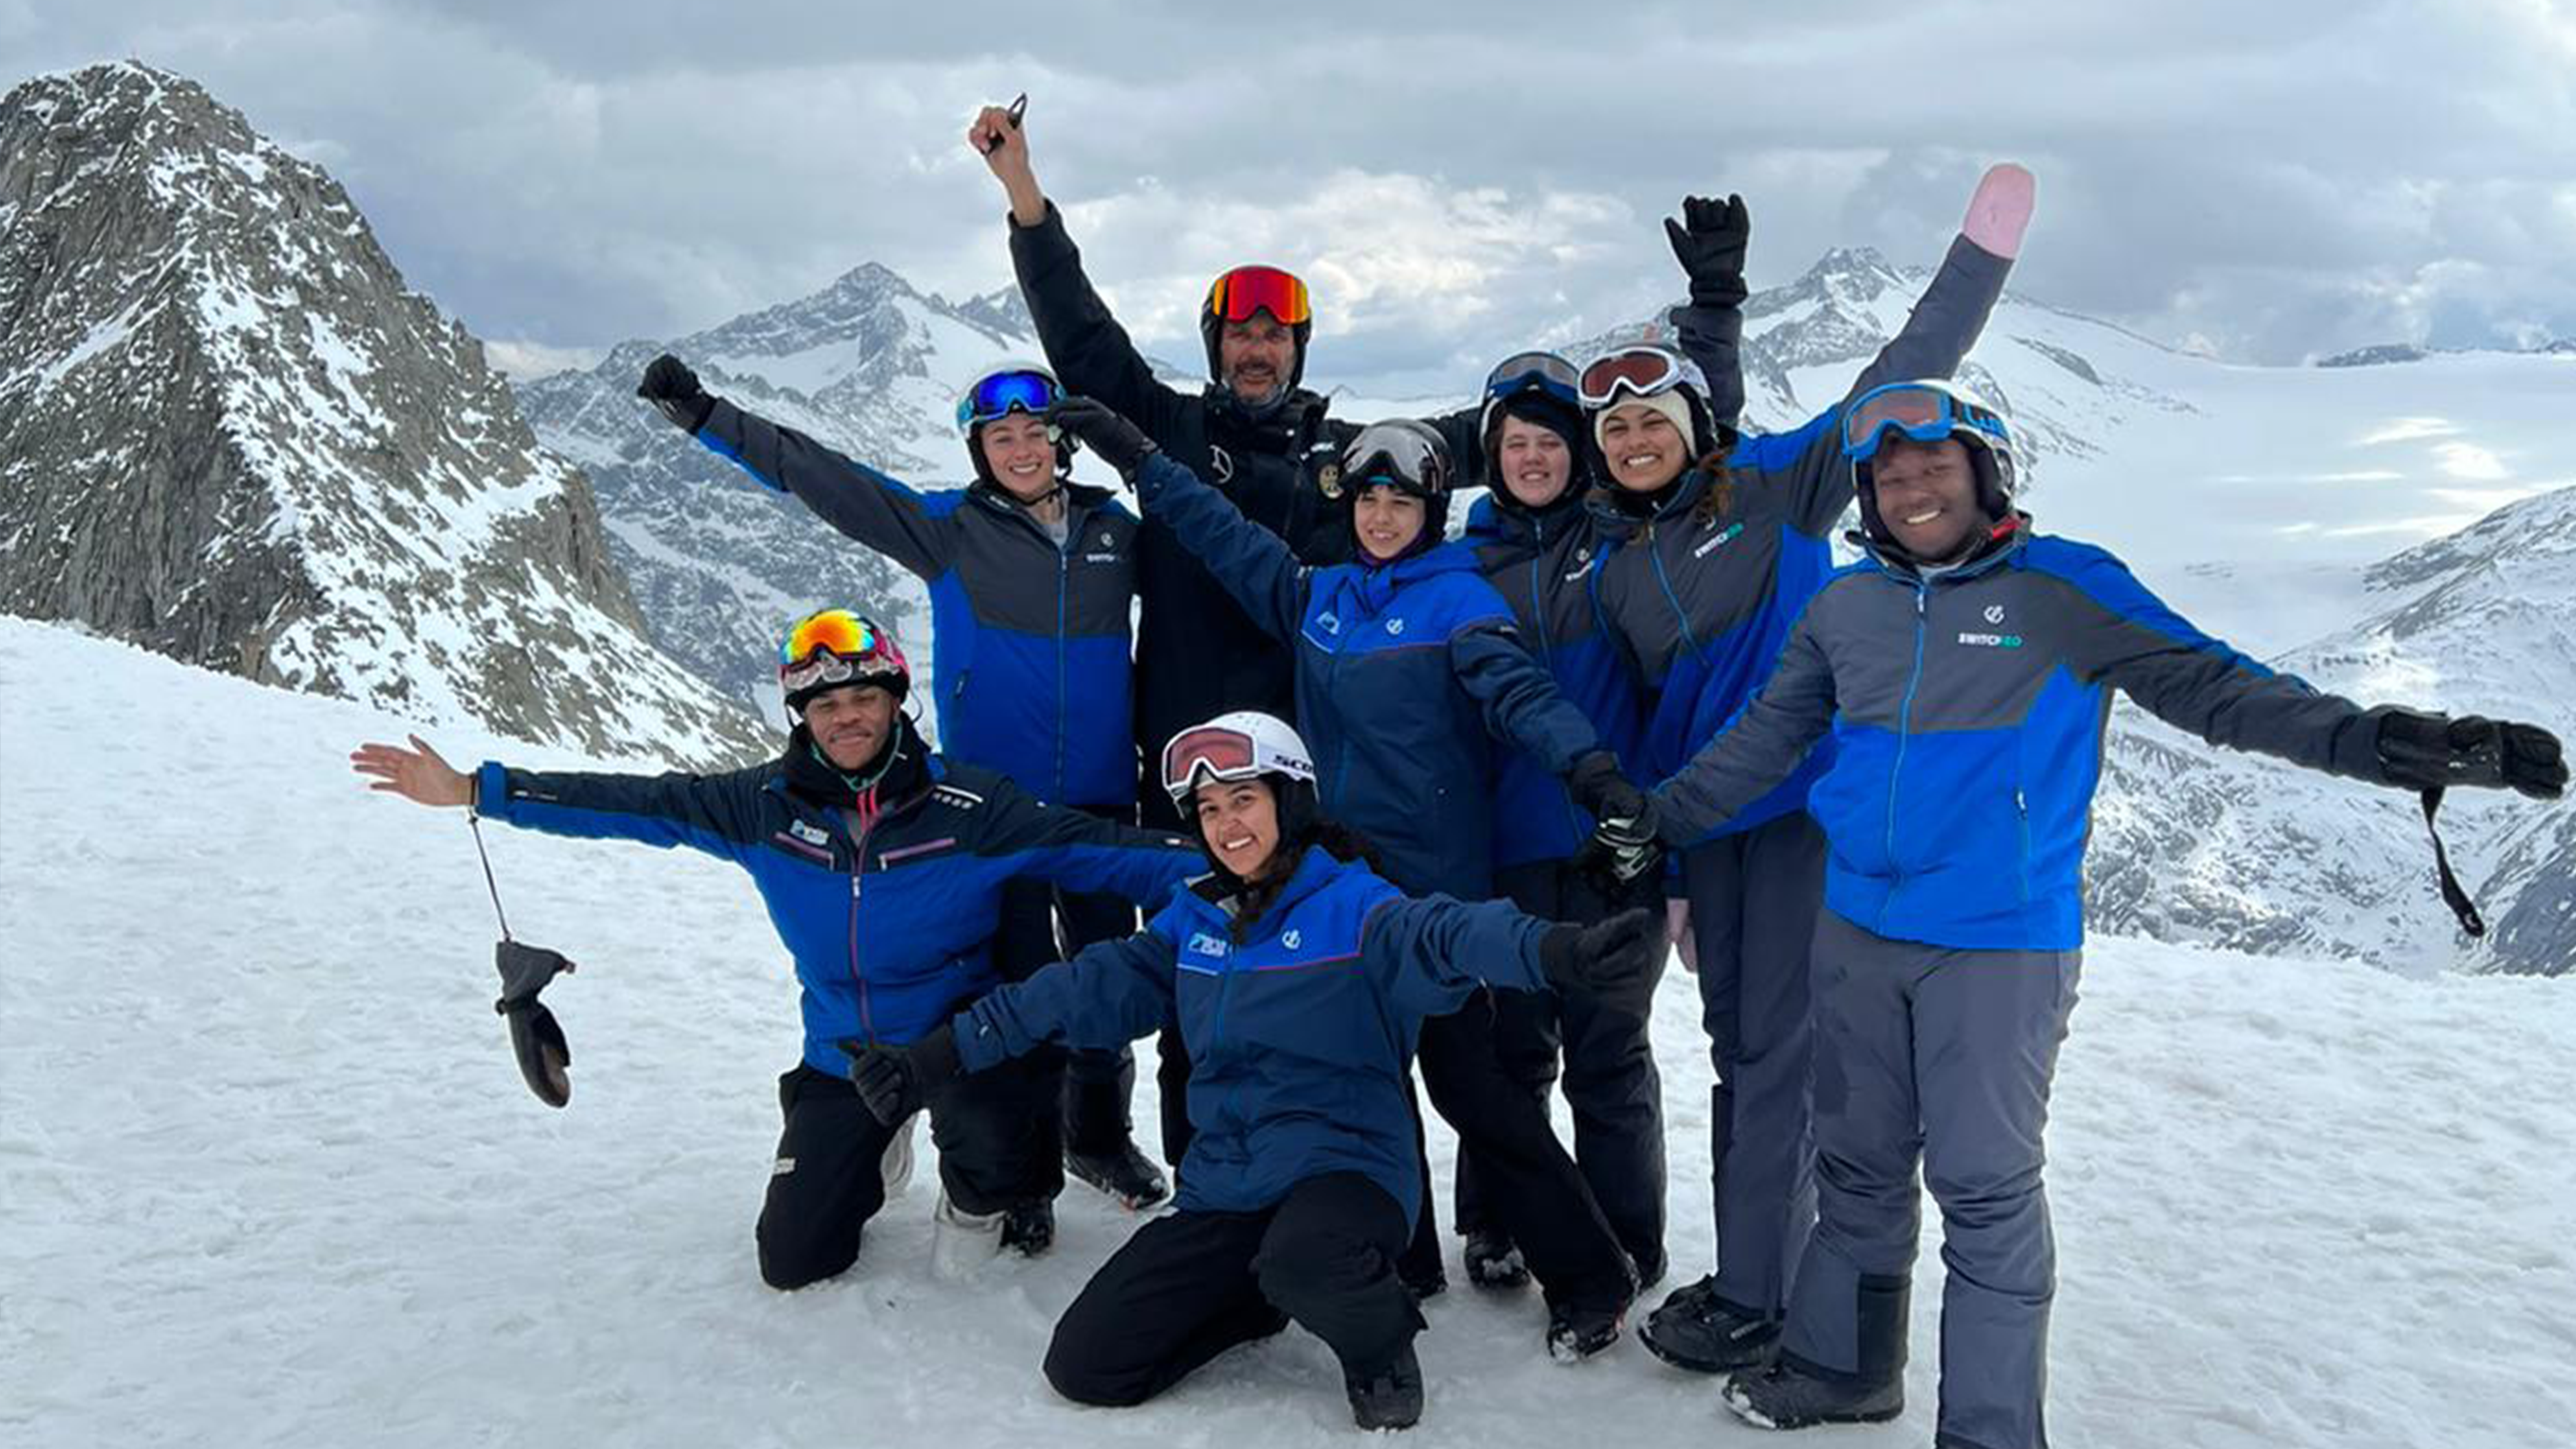 Hafsah and group against panoramic Passo Tonale background